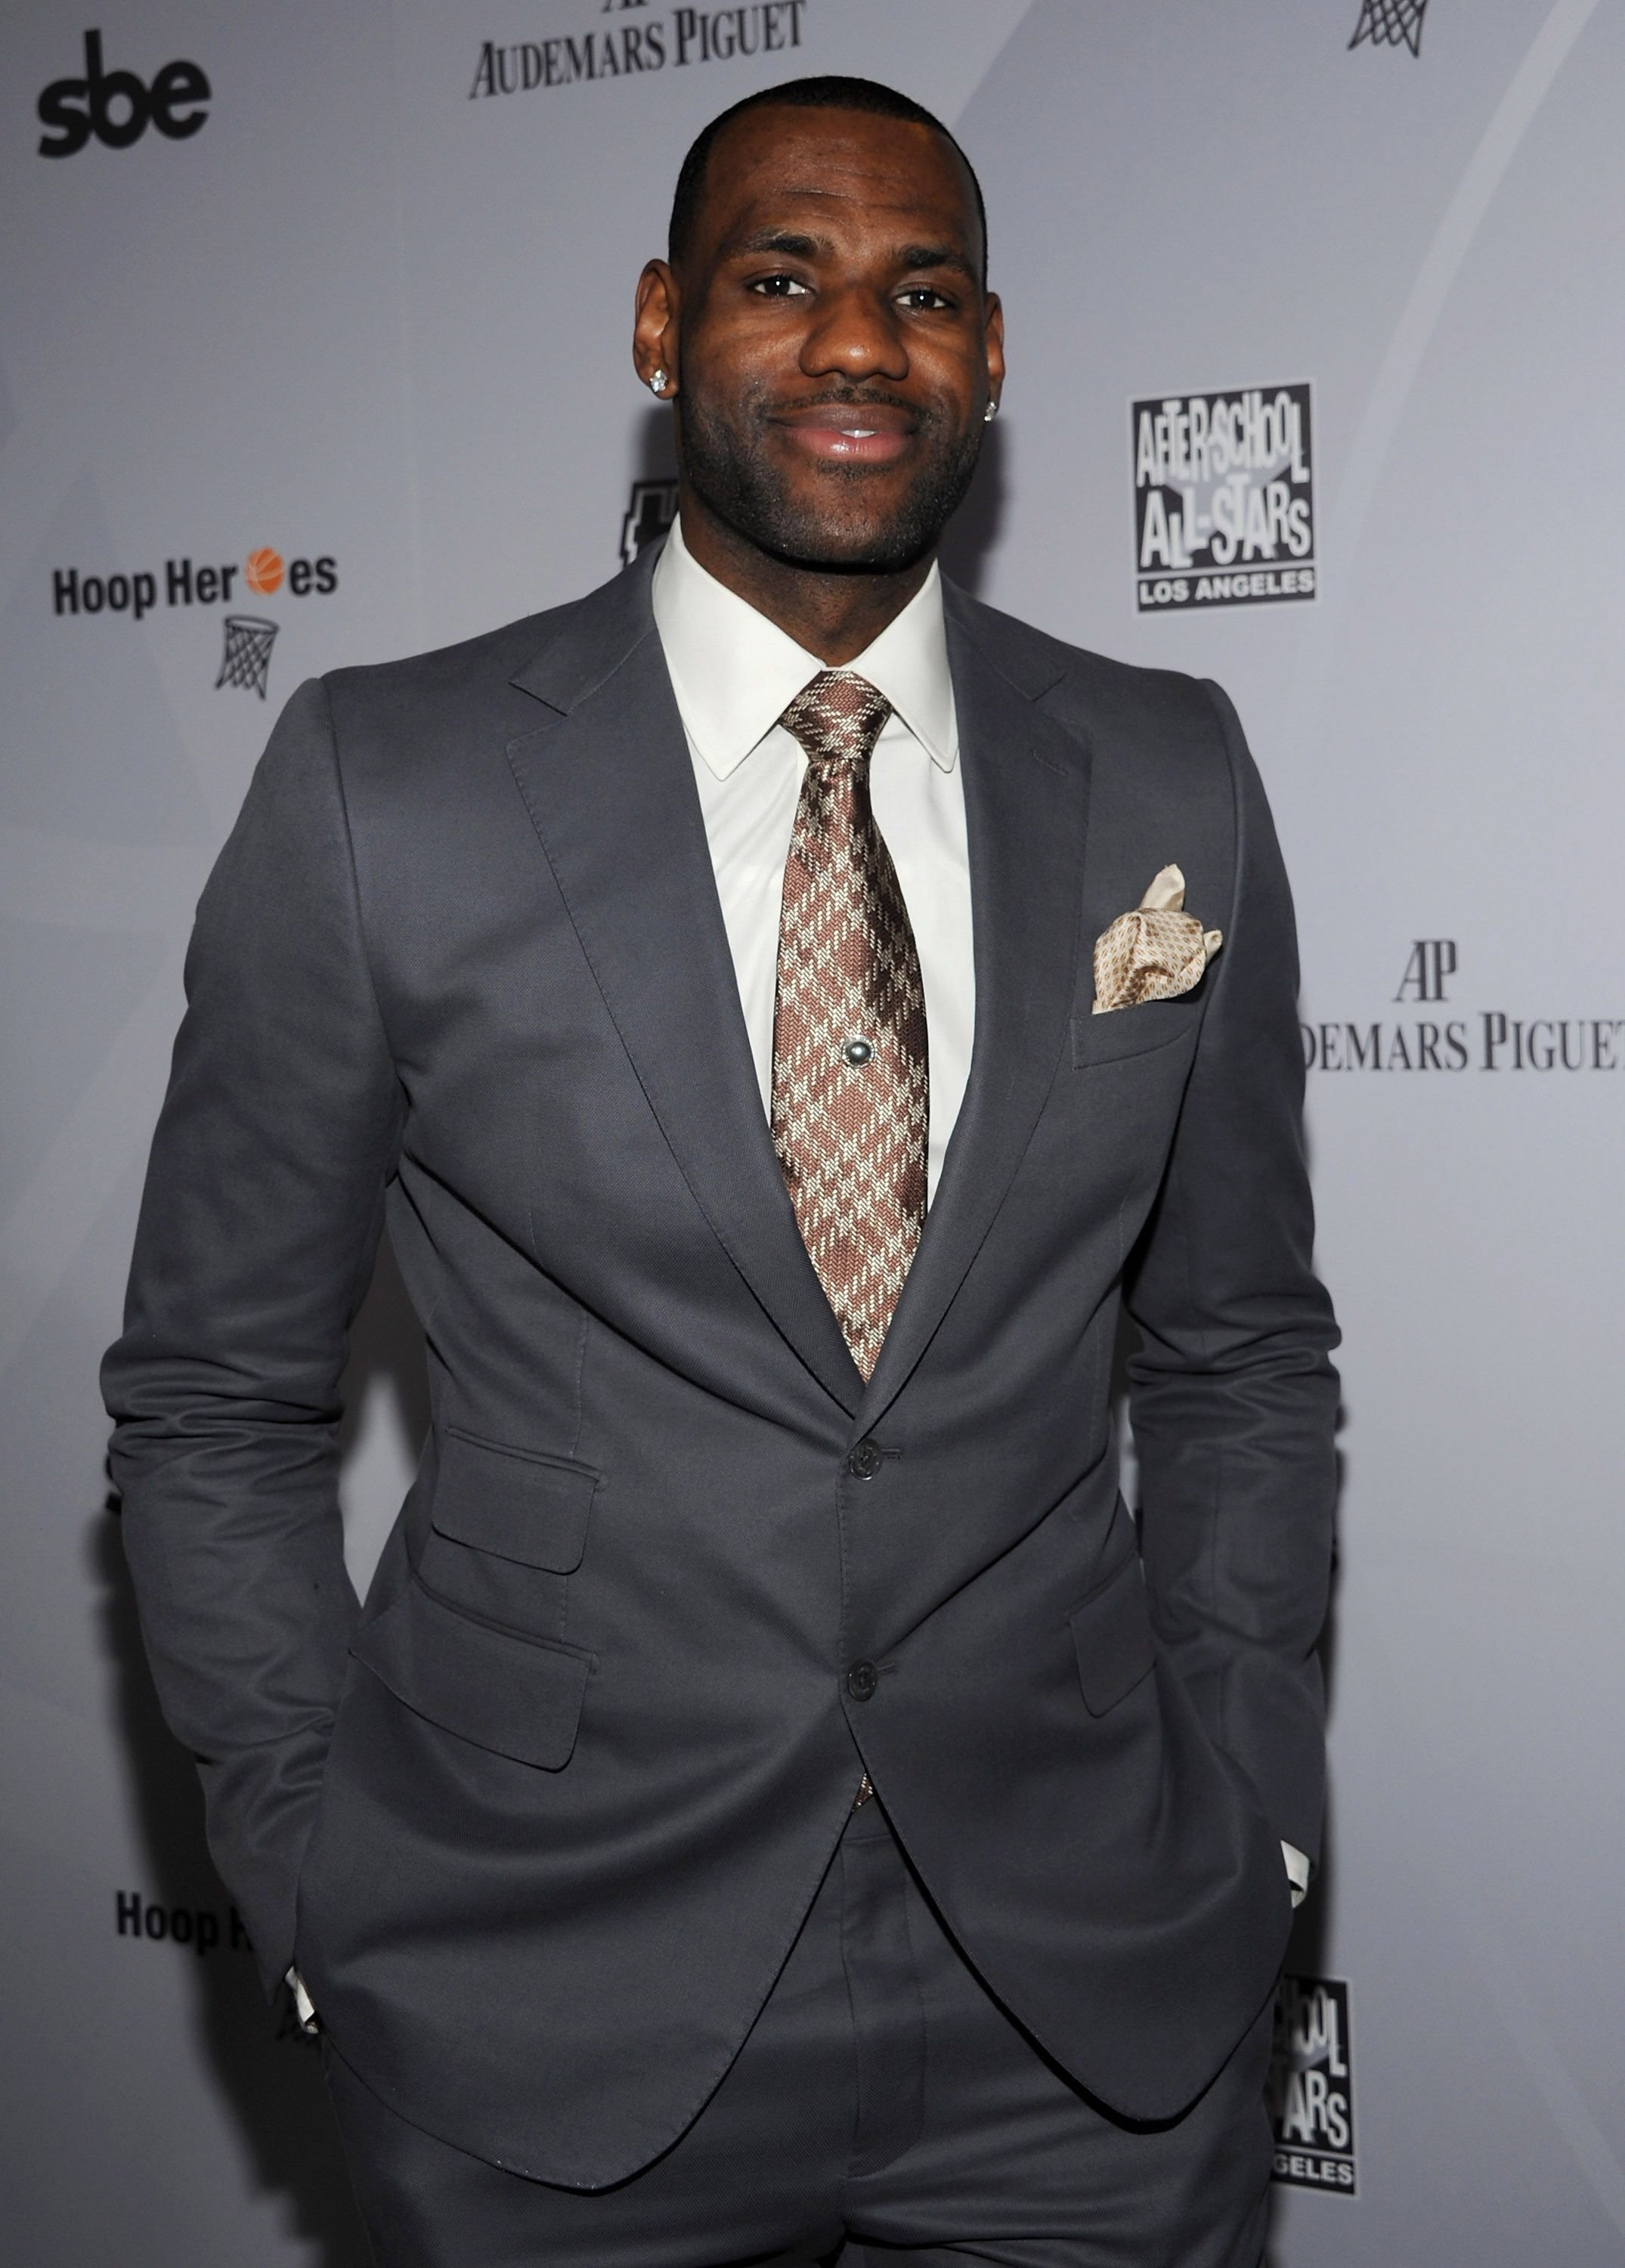 LeBron James during the After-School All Stars (ASAS) Hoop Heroes Salute launch party at Katsuya, LA Live on February 18, 2011 in Los Angeles, California. | Source: Getty Images